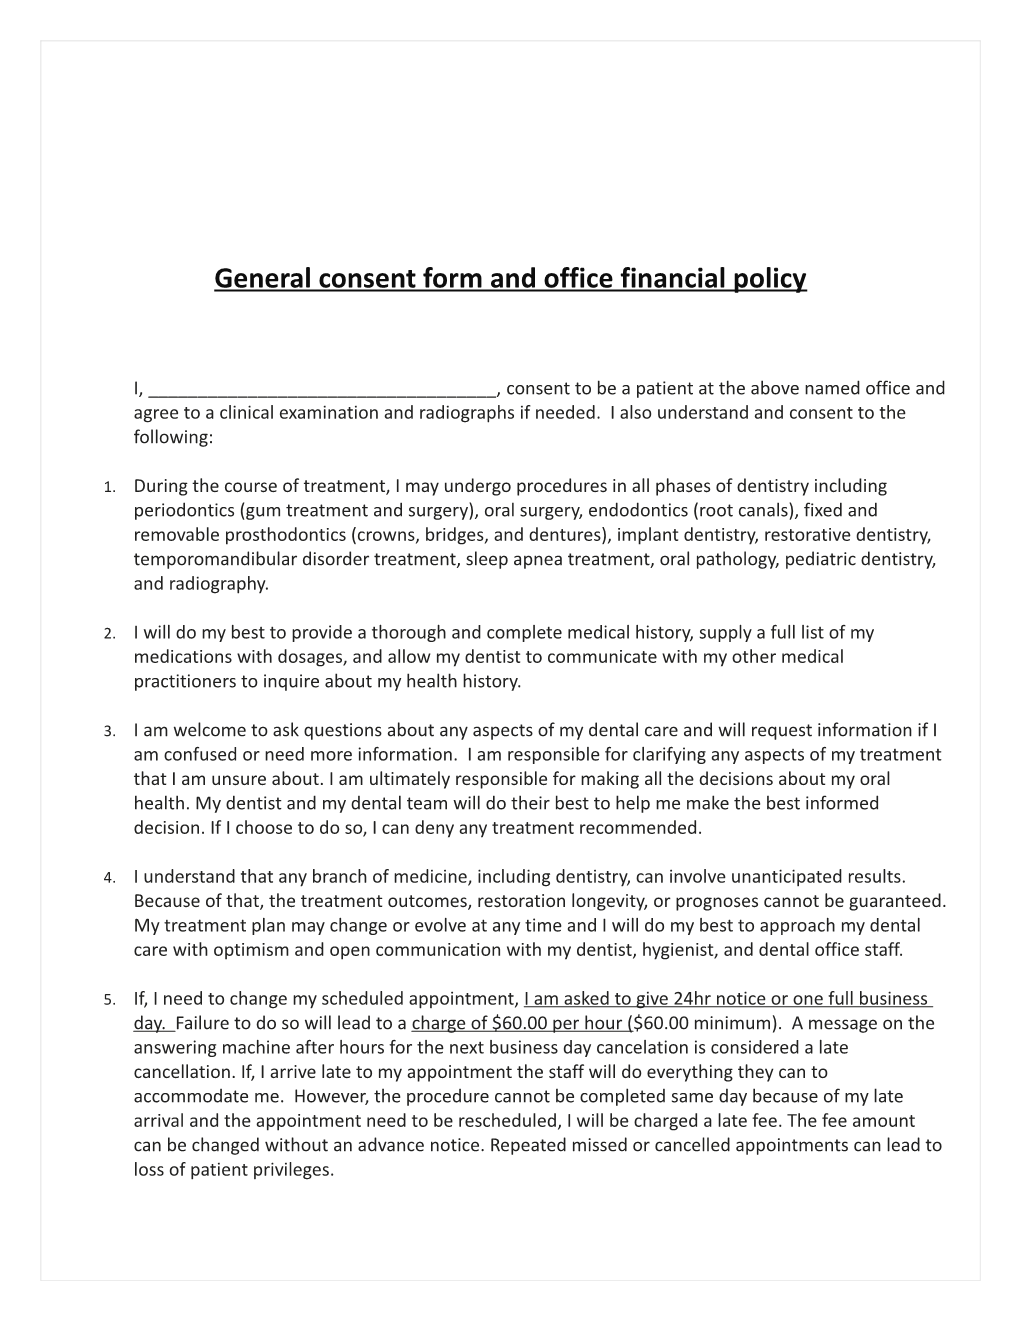 General Consent Form and Office Financial Policy